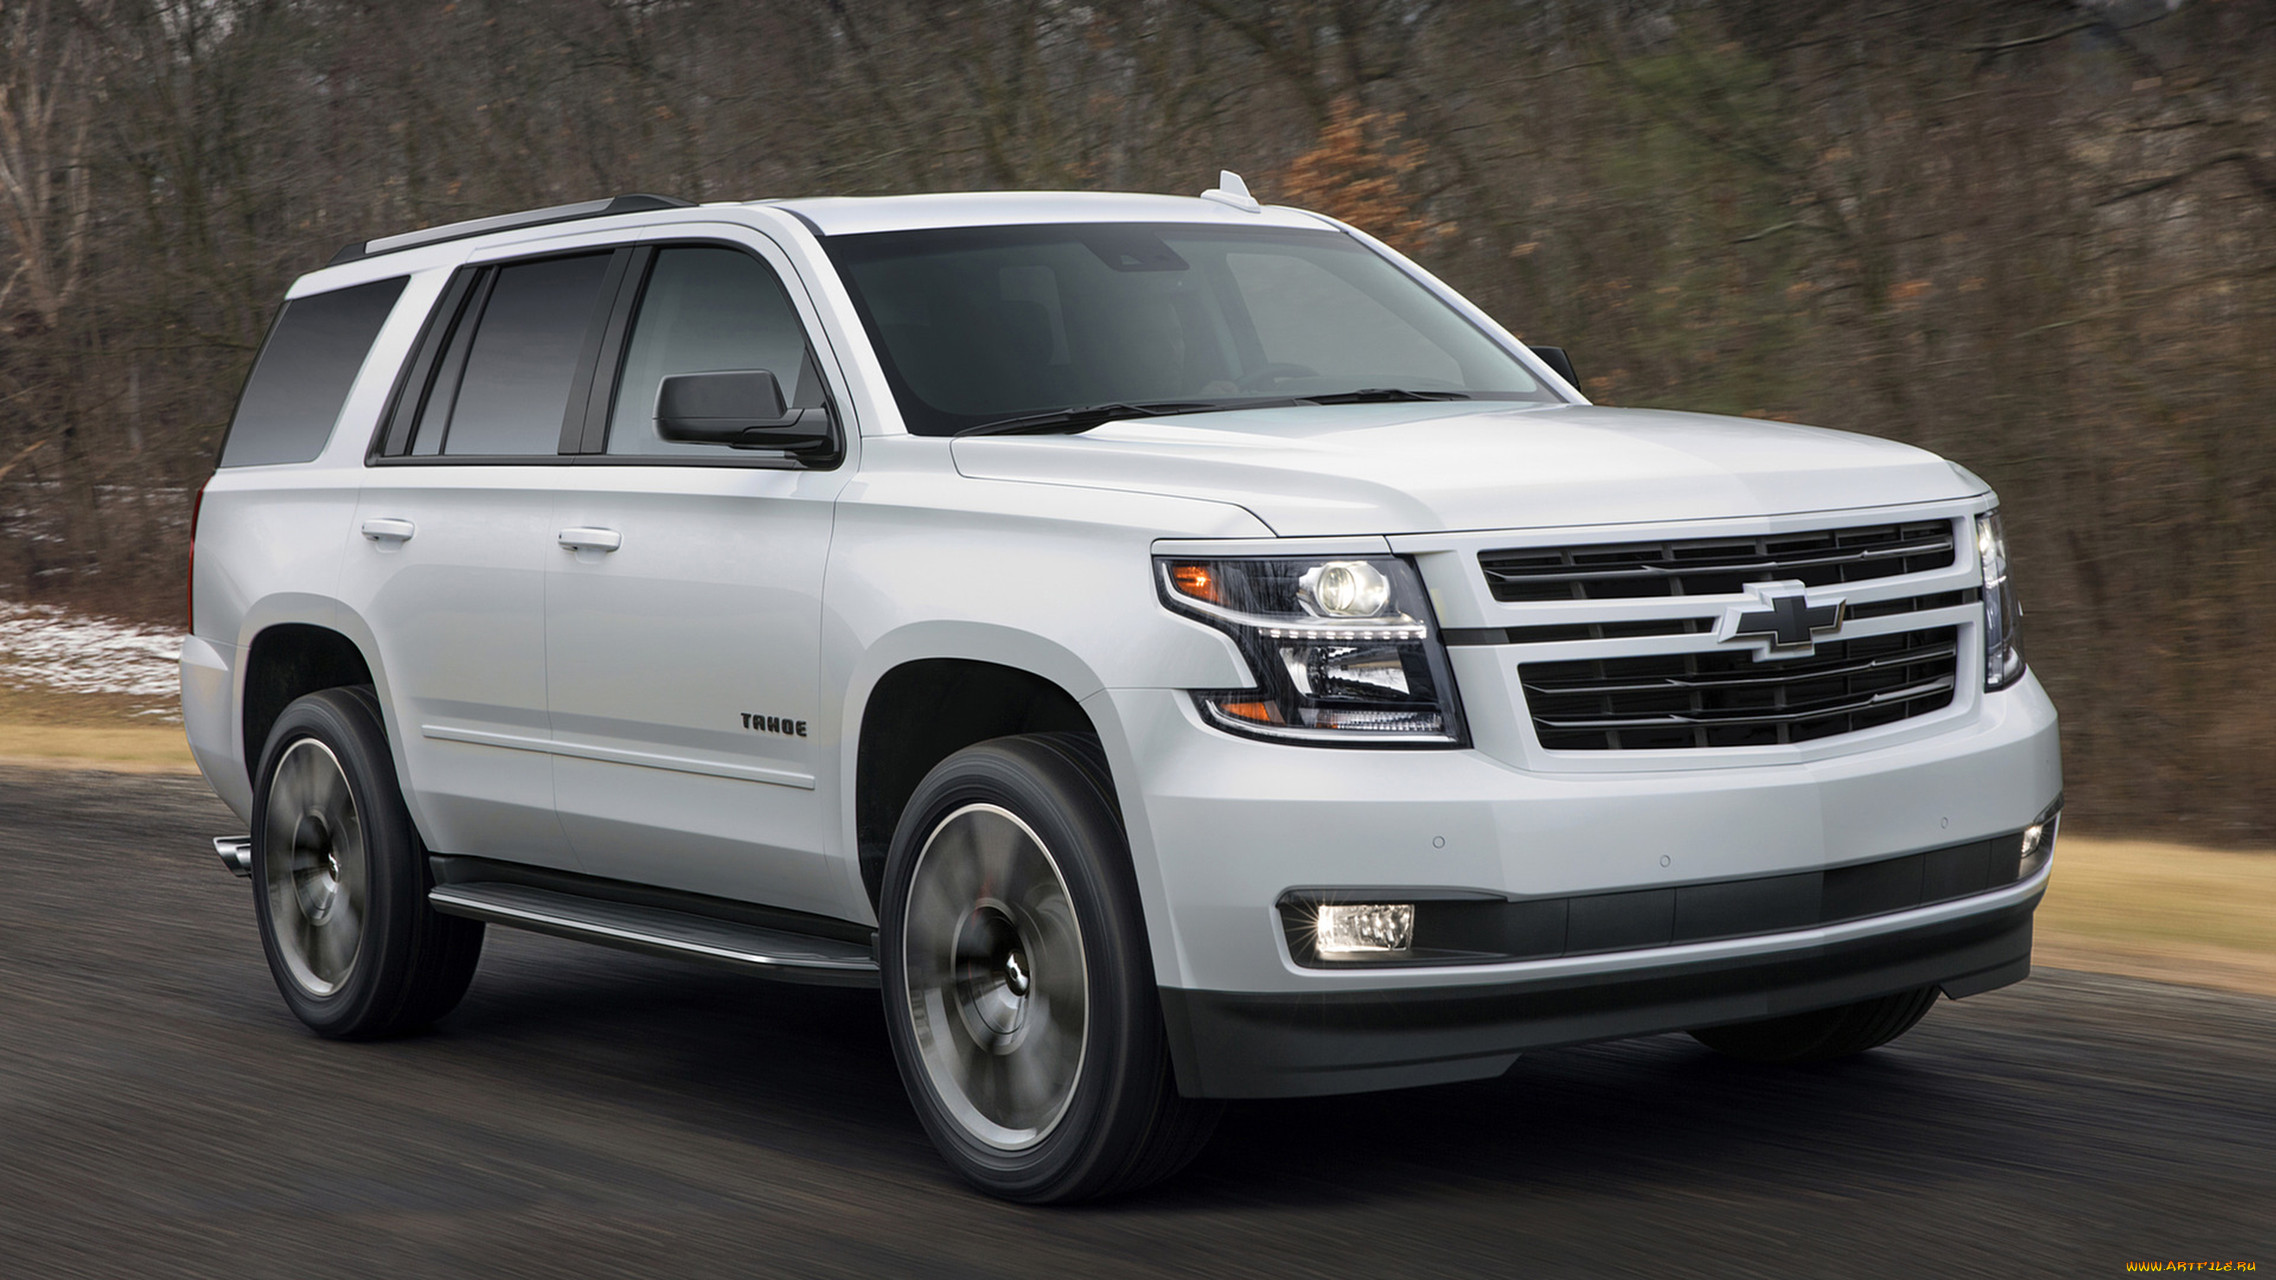 chevrolet tahoe rally sport truck special edition 2018, , chevrolet, 2018, editio, special, truck, sport, rally, tahoe